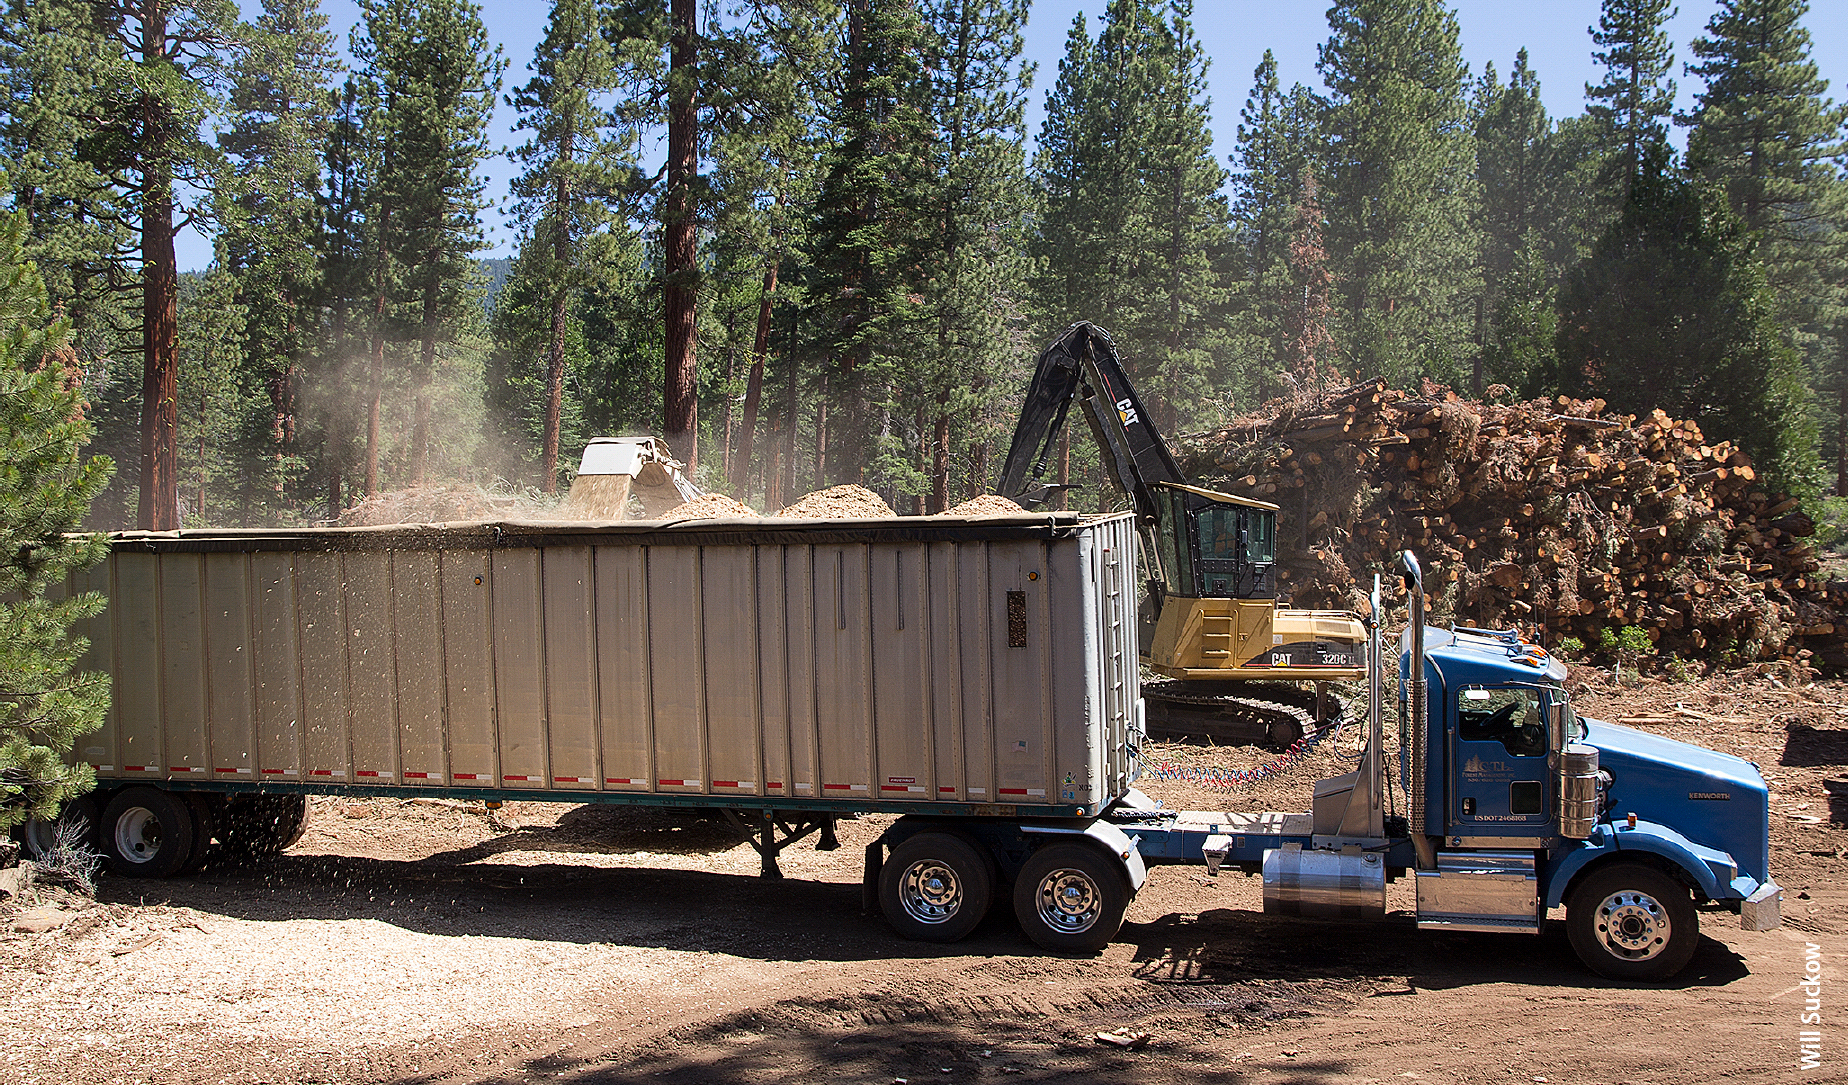 A trailer is loaded with wood chips at a U.S. Forest Service-funded fuels reduction project in the Lake Tahoe area. The chips will be hauled to a biomass energy facility to help defray disposal costs.